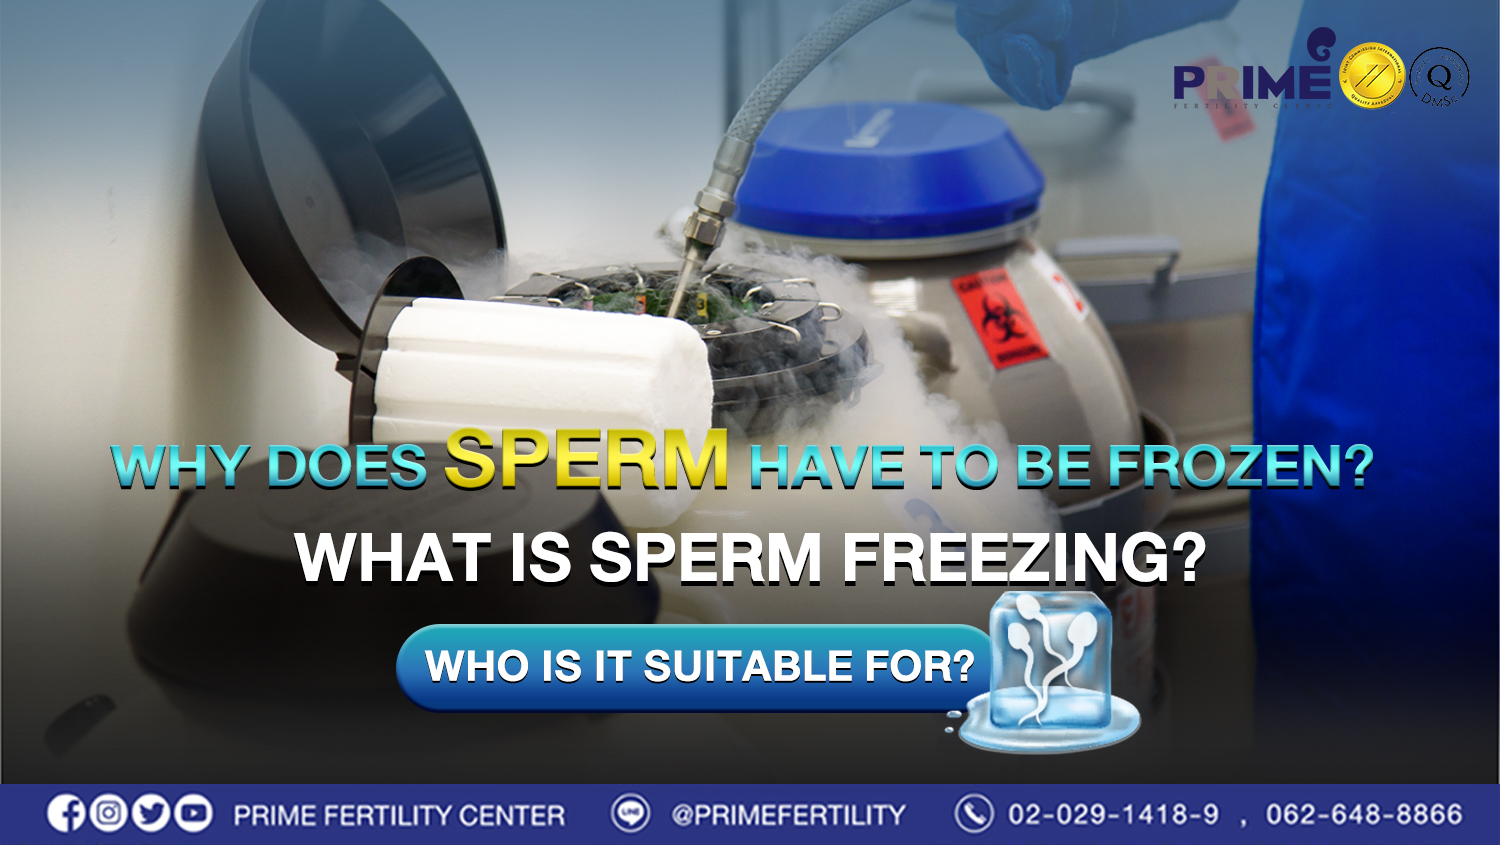 Why does sperm have to be frozen? What is sperm freezing? Who is it suitable for?